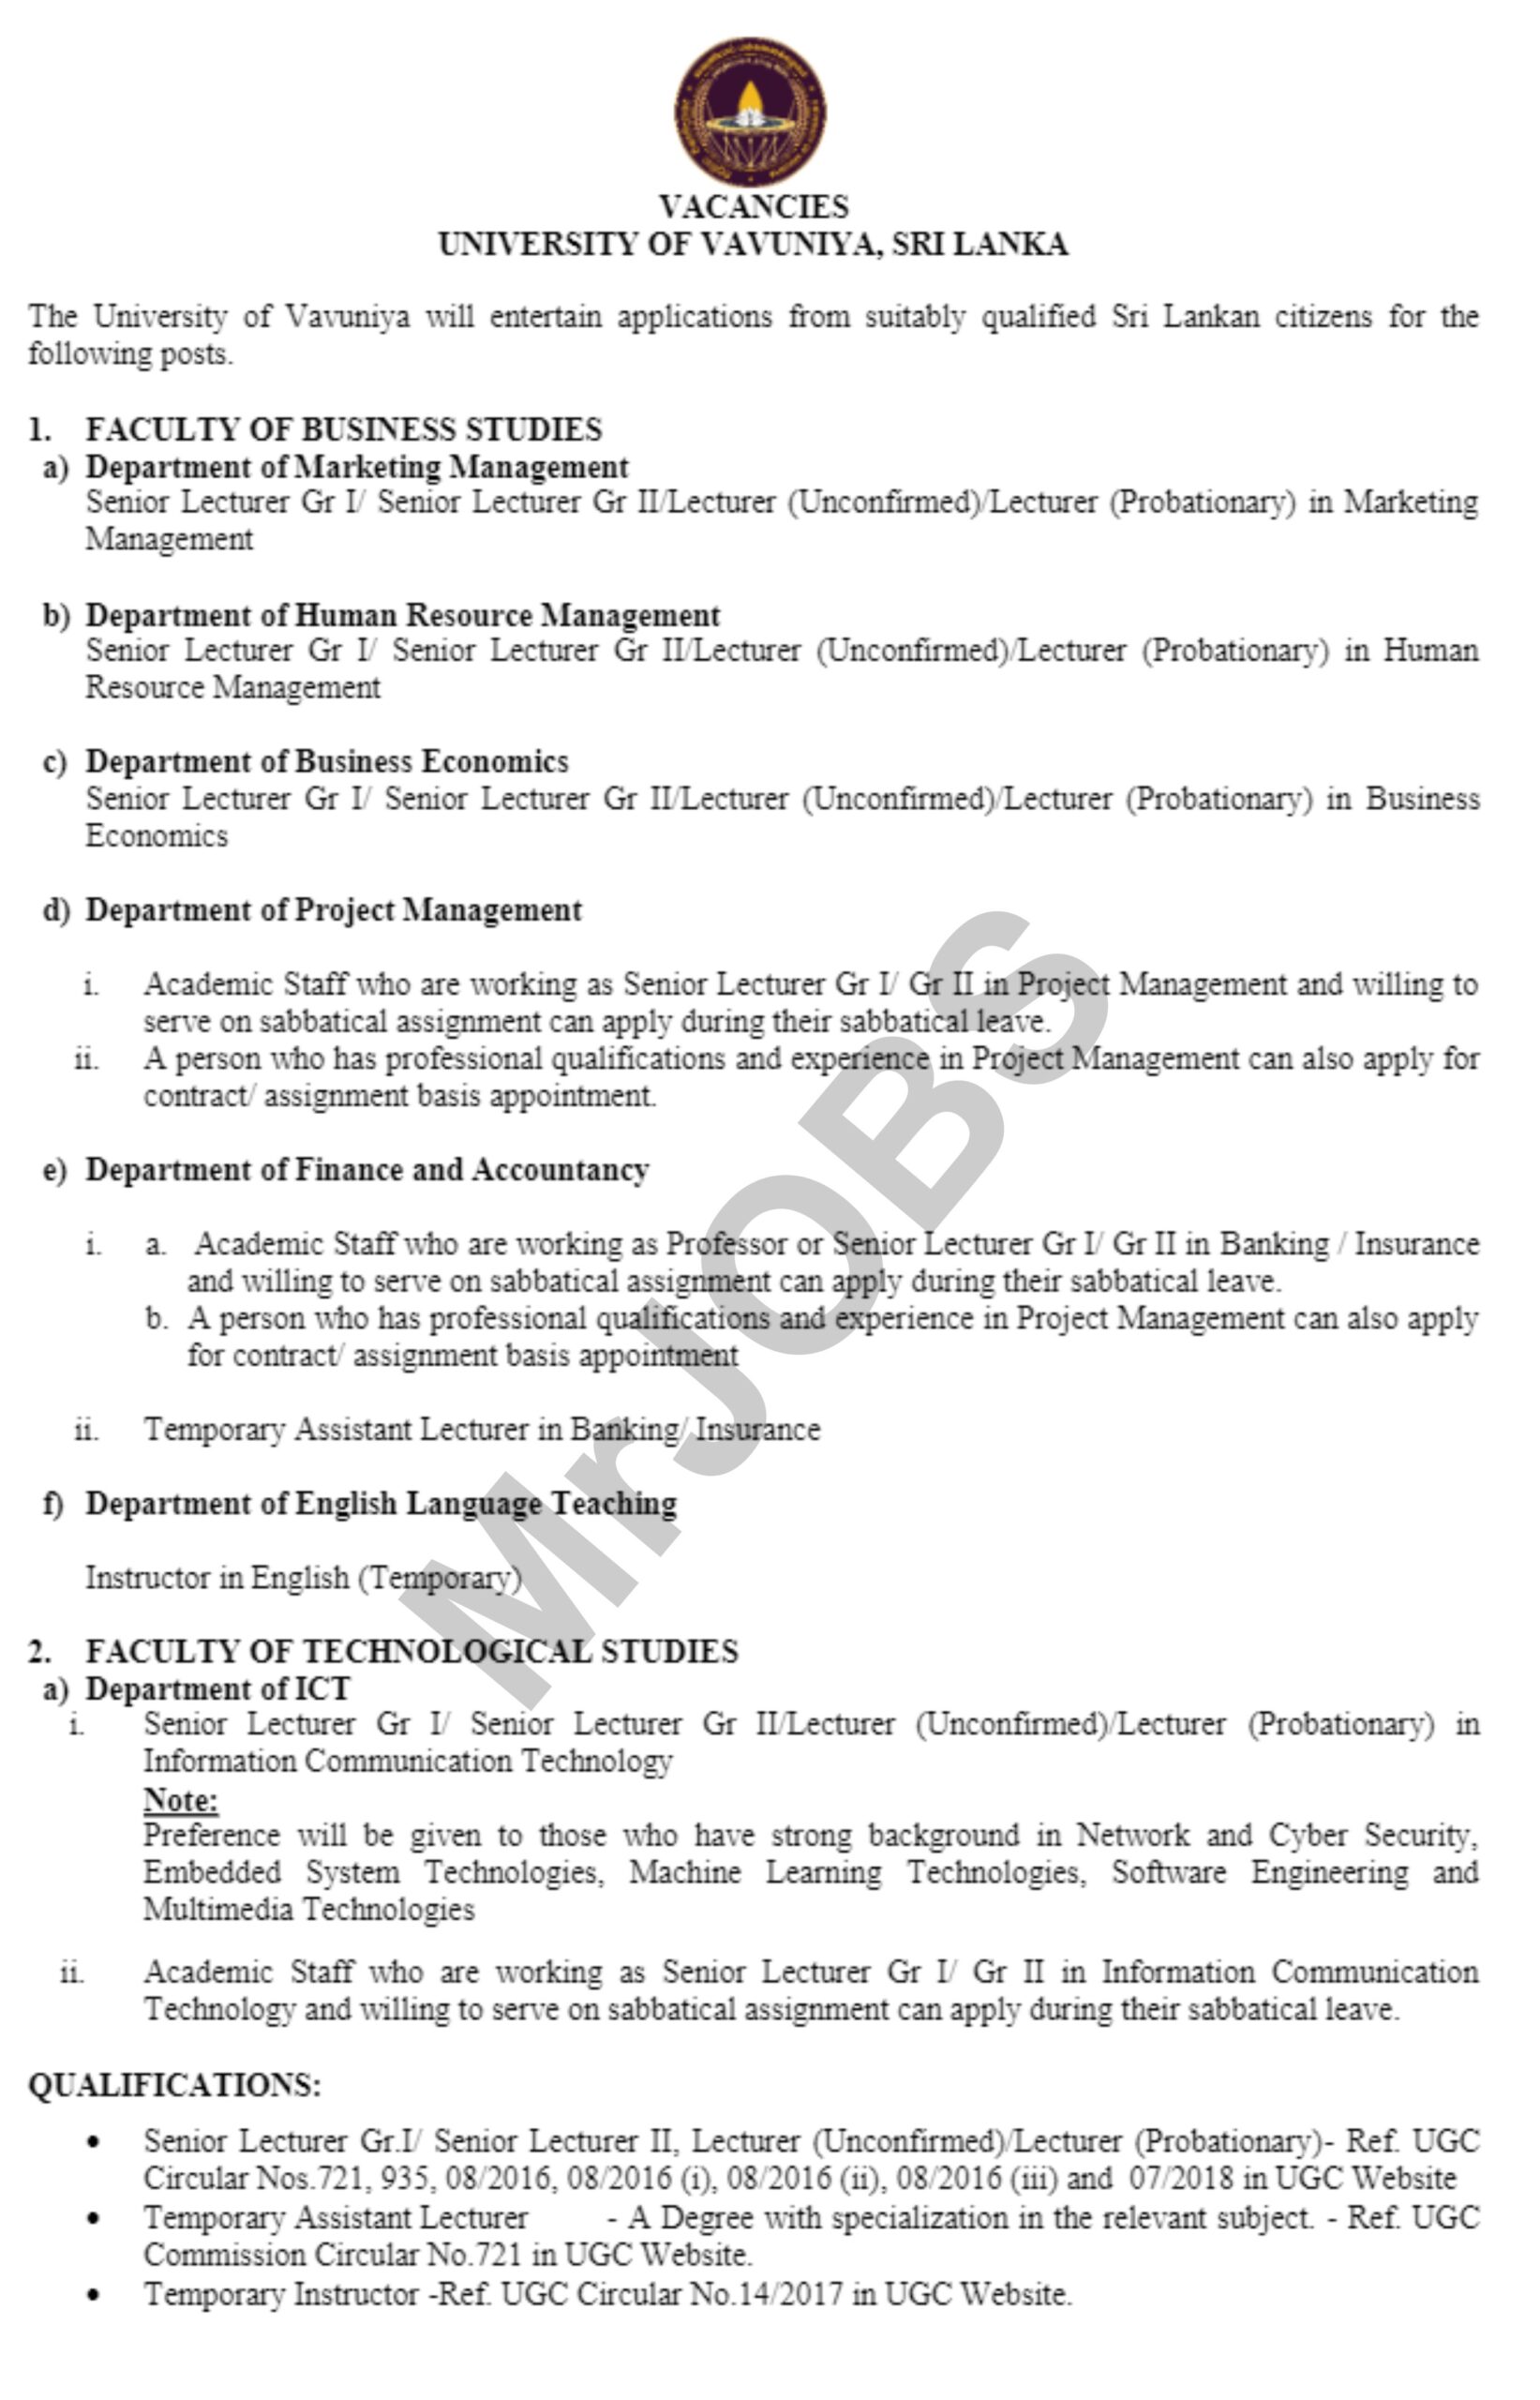 Senior Lecturer, Temporary Assistant Lecturer, Instructor in English – University of Vavuniya Vacancies 2023